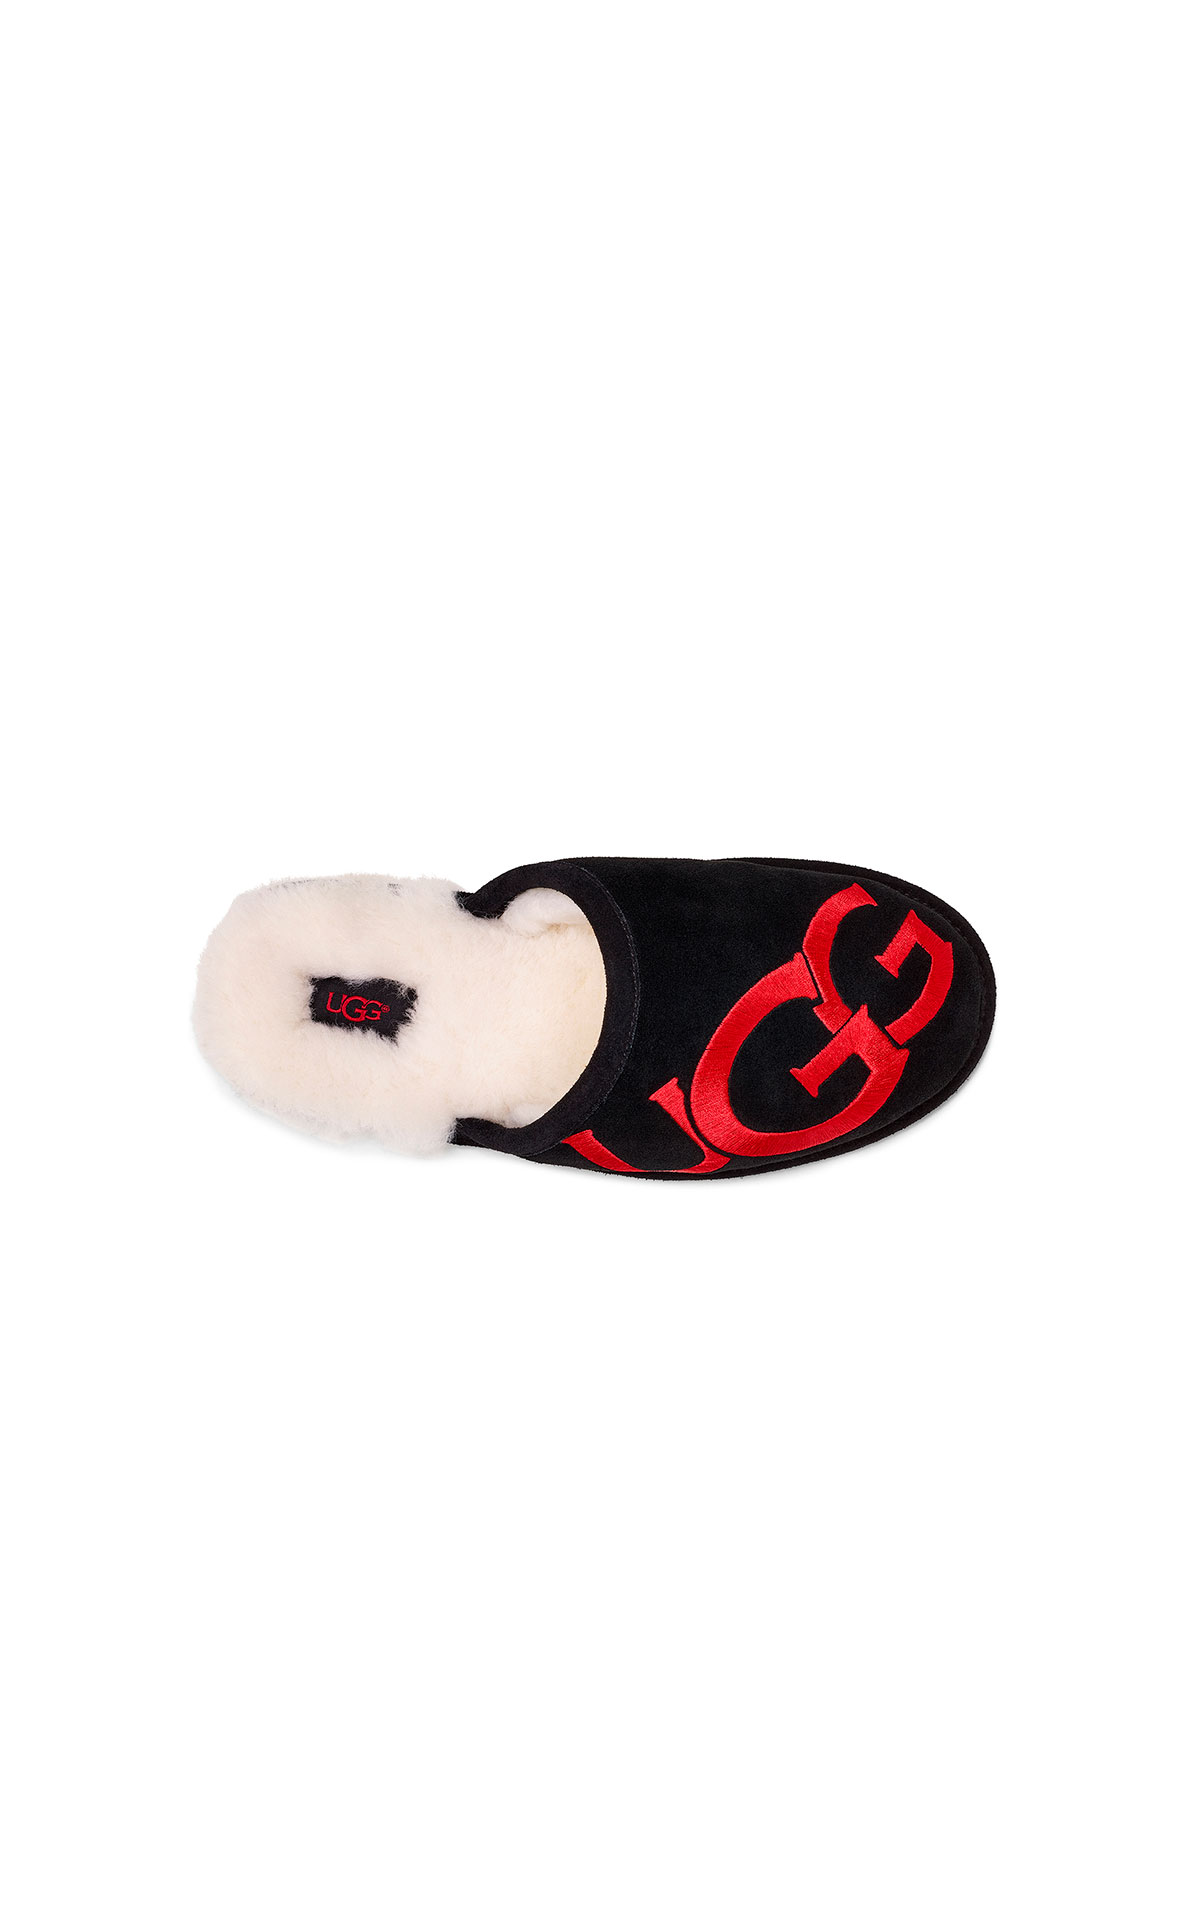 Black sneakers with red logo UGG